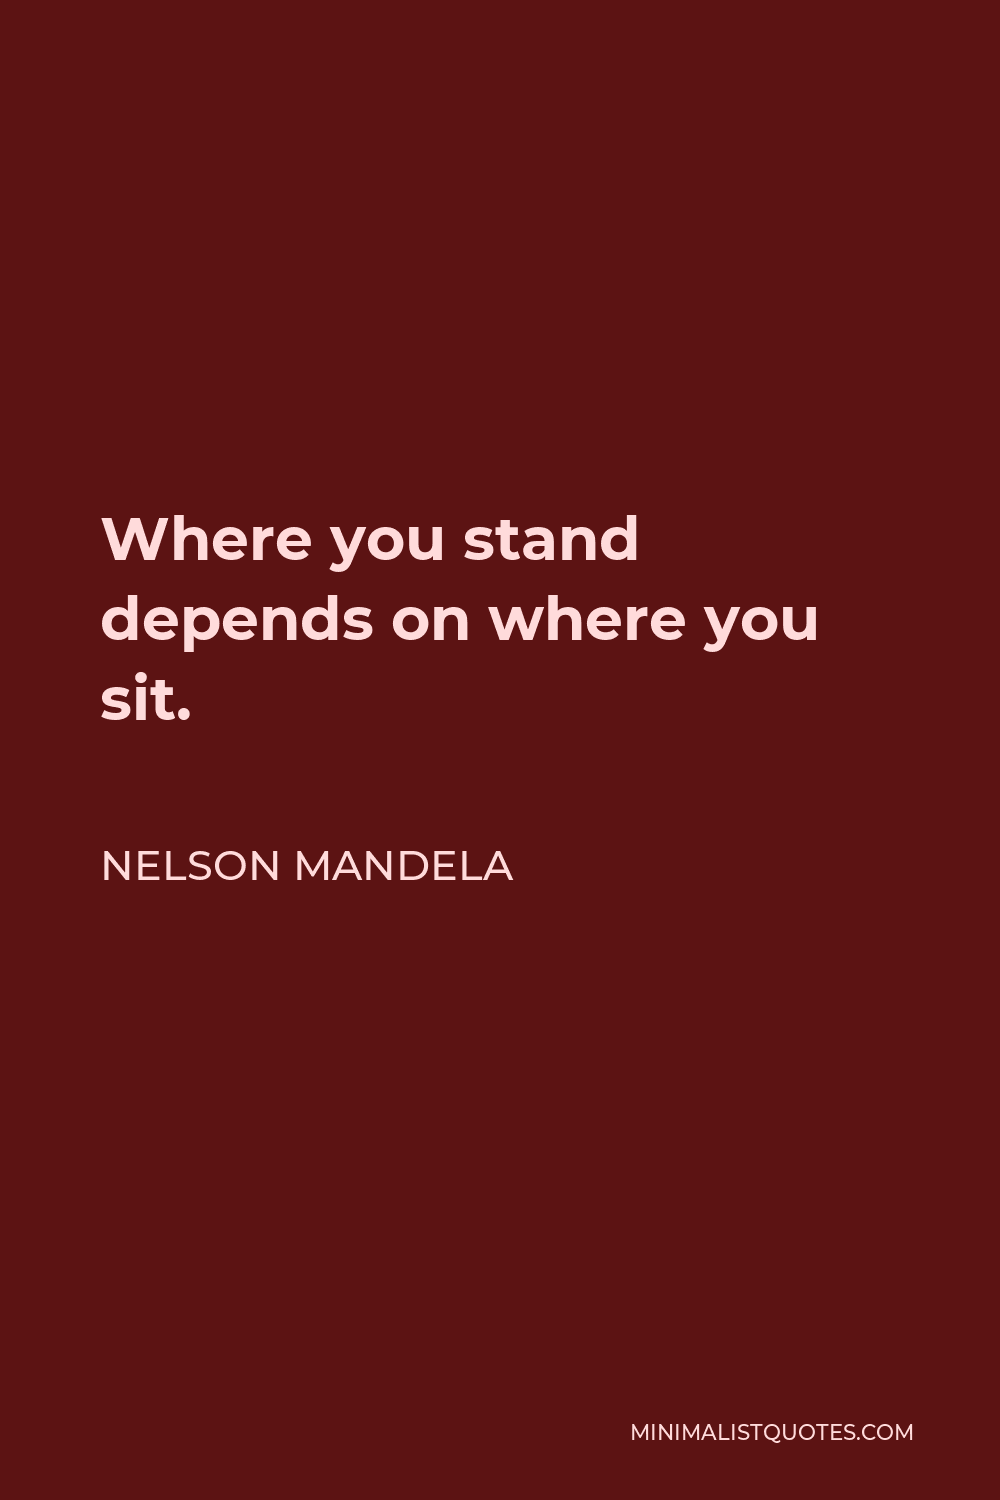 Nelson Mandela Quote - Where you stand depends on where you sit.